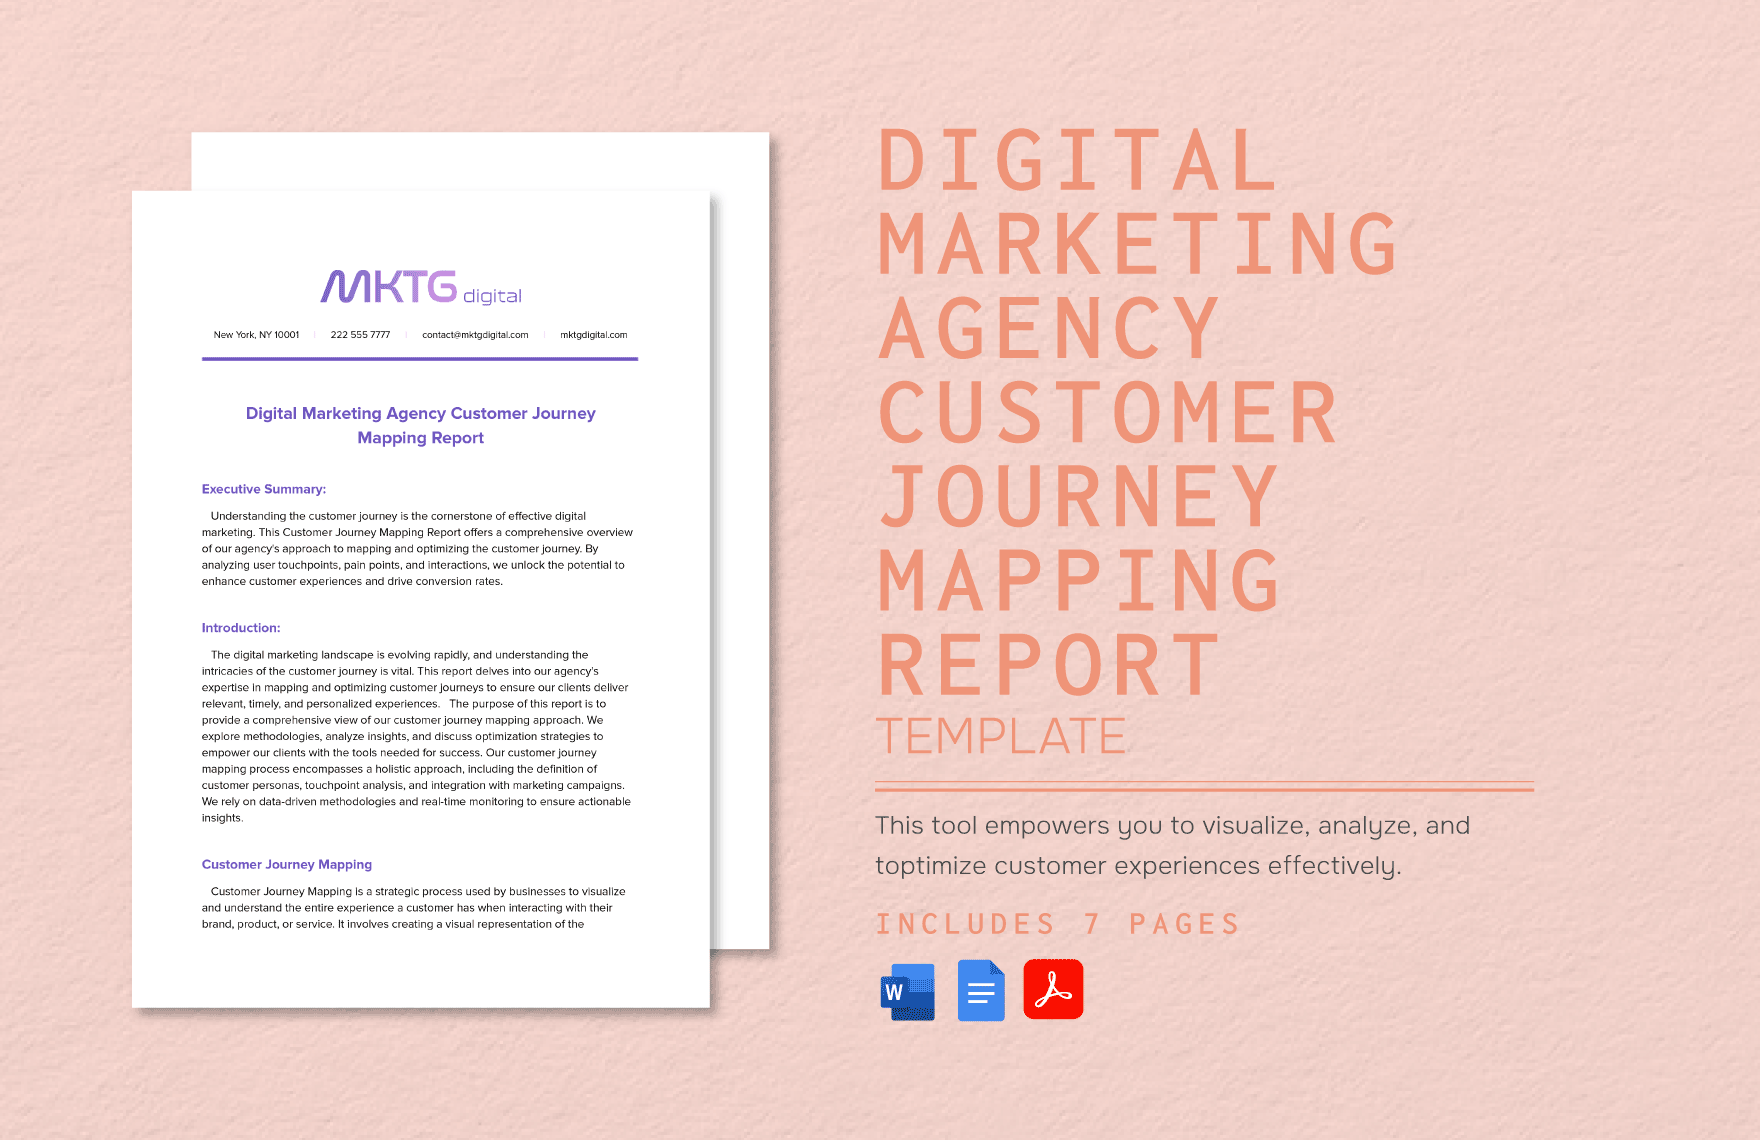 Digital Marketing Agency Customer Journey Mapping Report Template